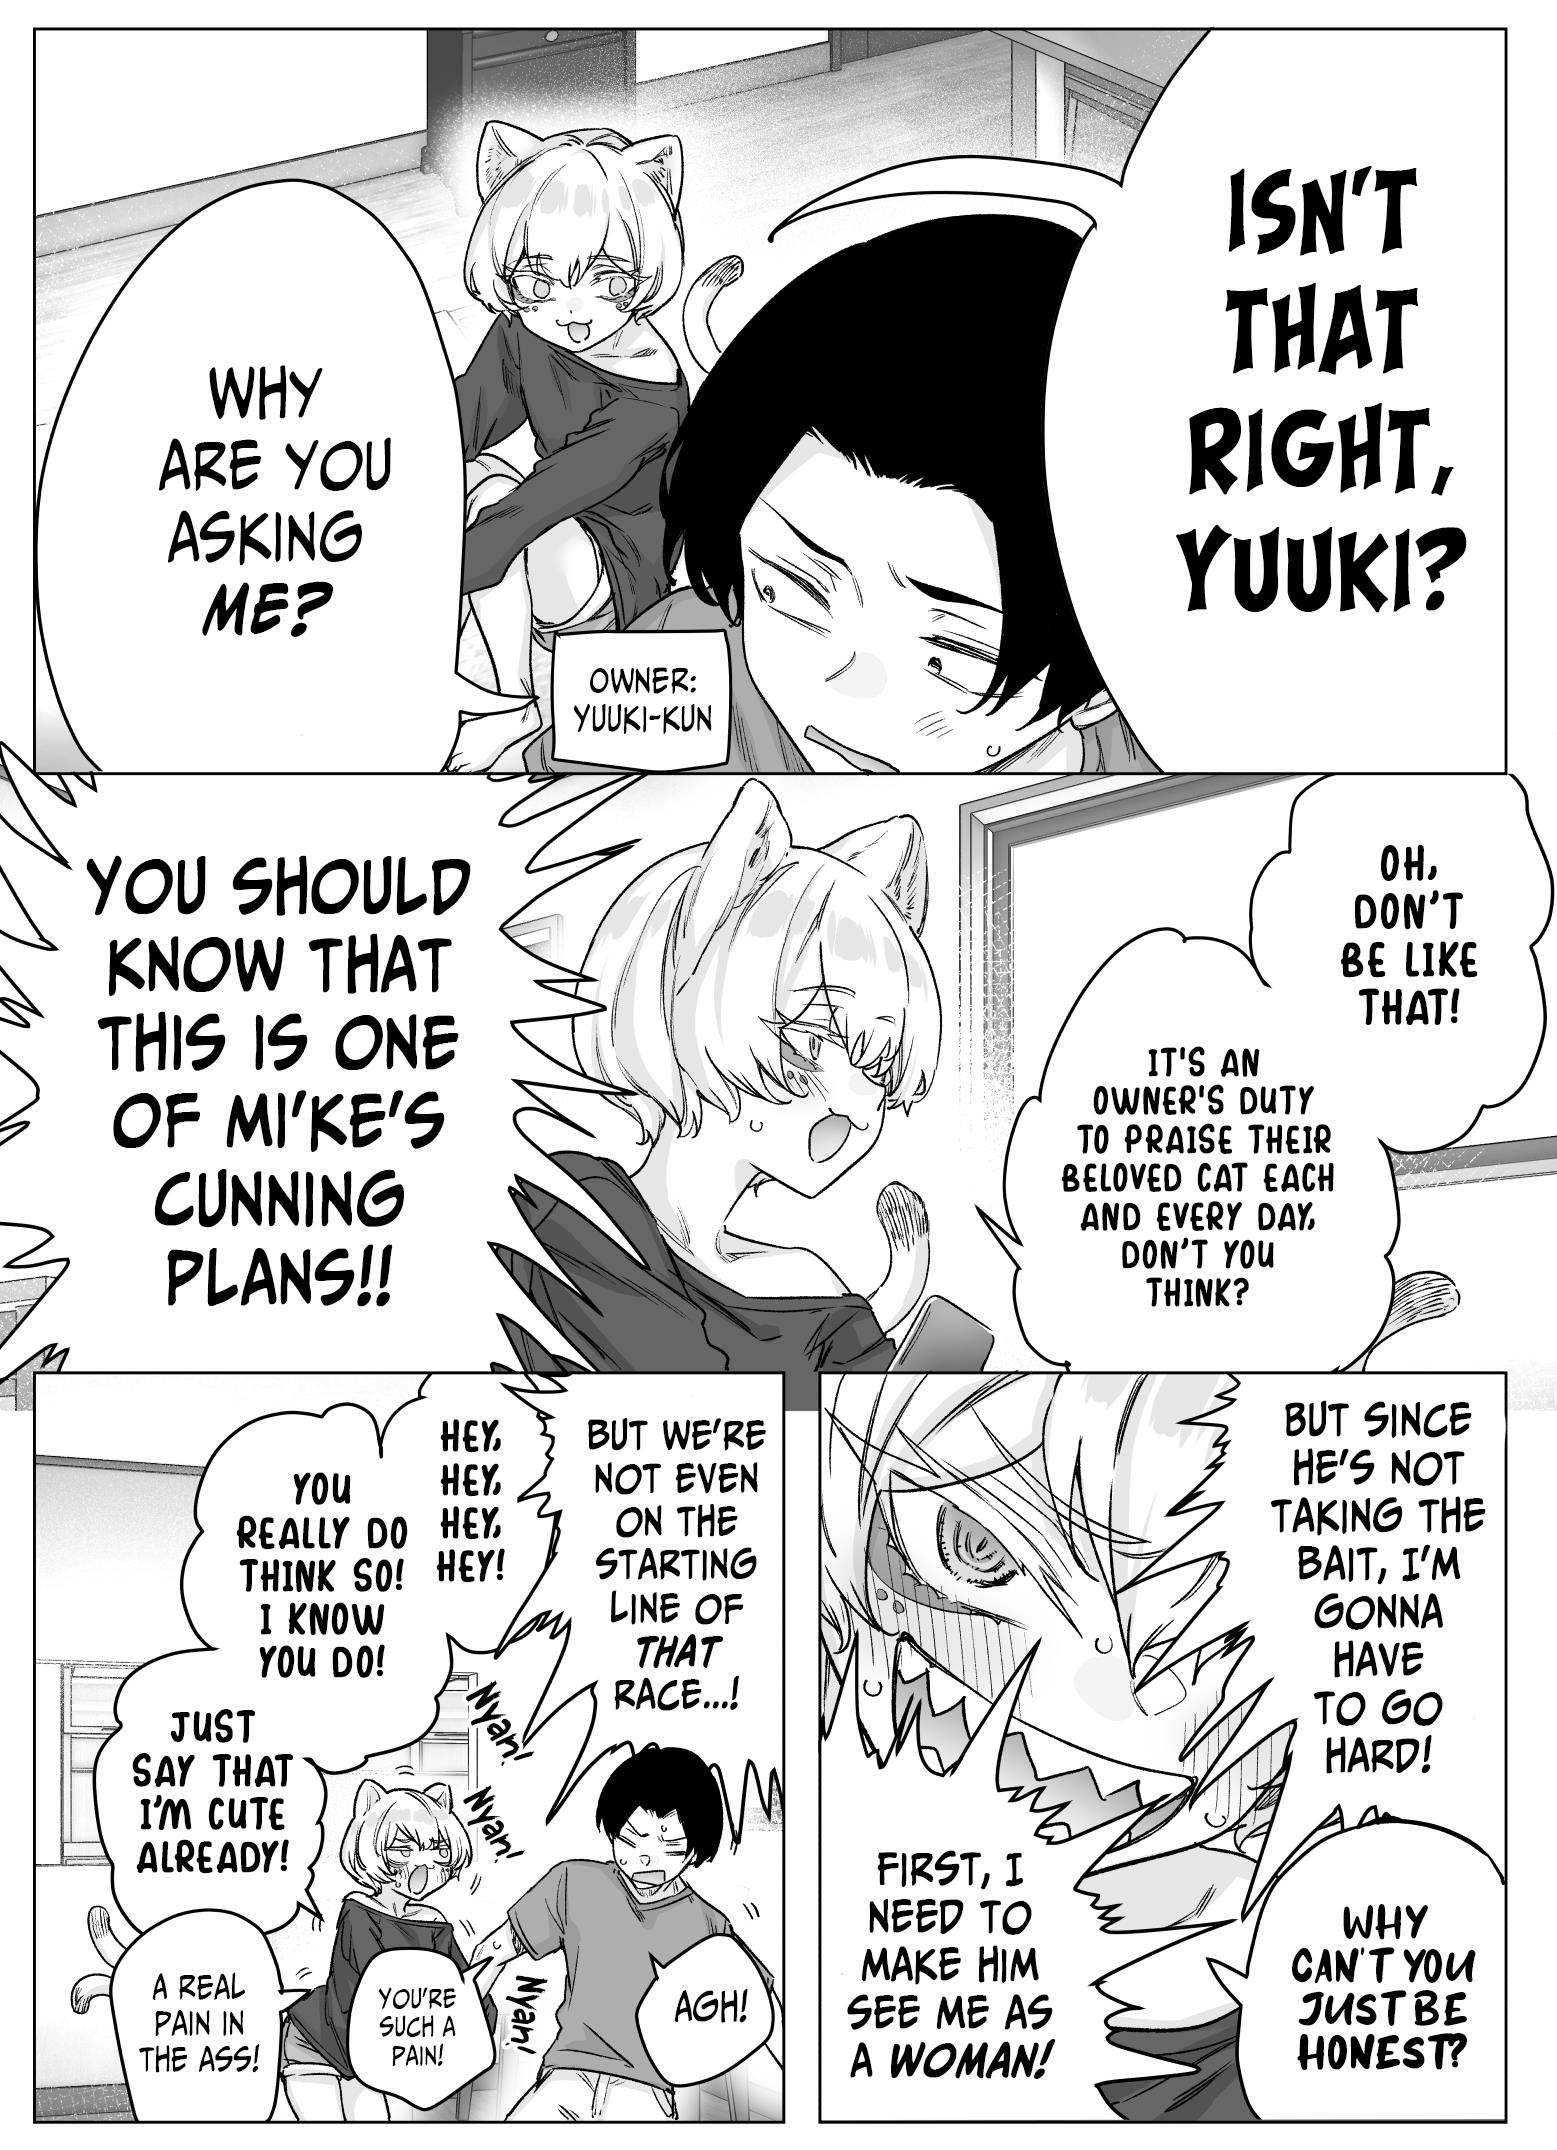 Even Though She's The Losing Heroine, The Bakeneko-Chan Remains Undaunted - Page 2